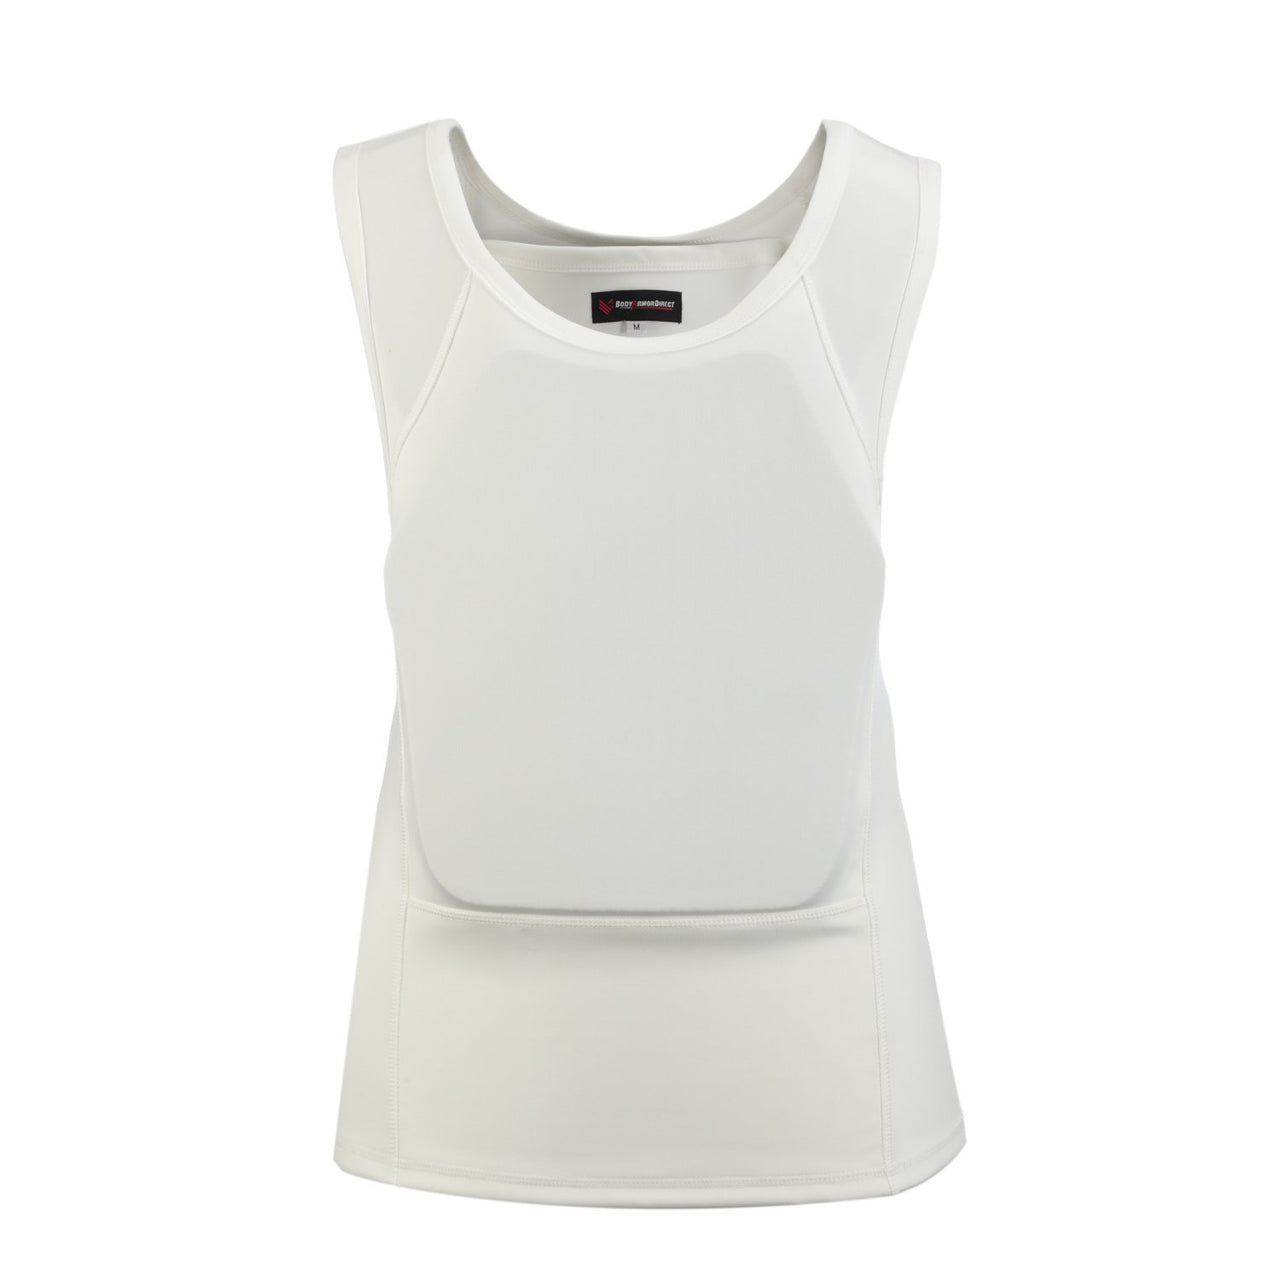 The back view of a women's white Body Armor Direct Concealable Express T-Shirt Carrier vest.